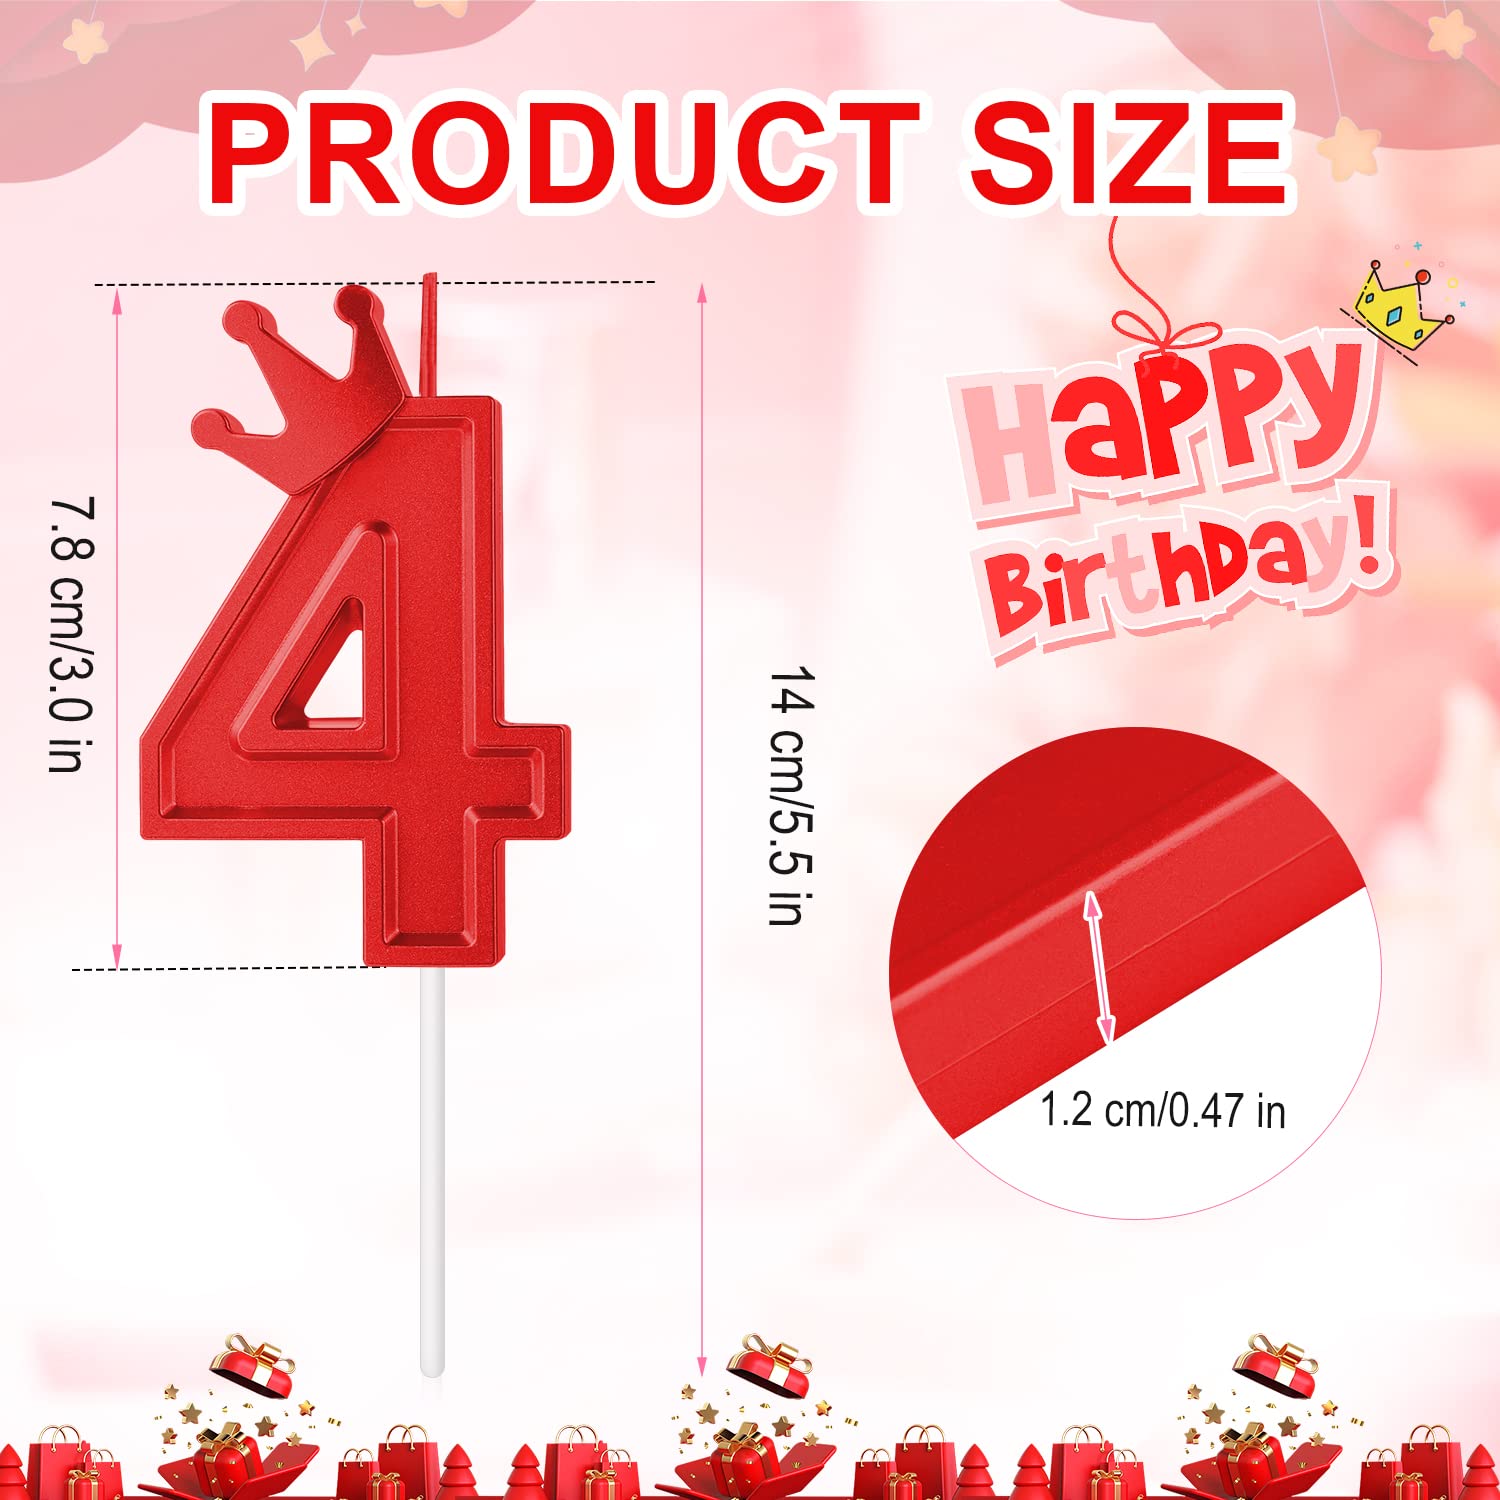 AIEX 3 Inch Birthday Number Candle, Large Birthday Candles 3D Number Candles for Birthday Cakes with Crown Decor Cake Topper Candle for Wedding Valentine Anniversary Festival Party (Red, 4)